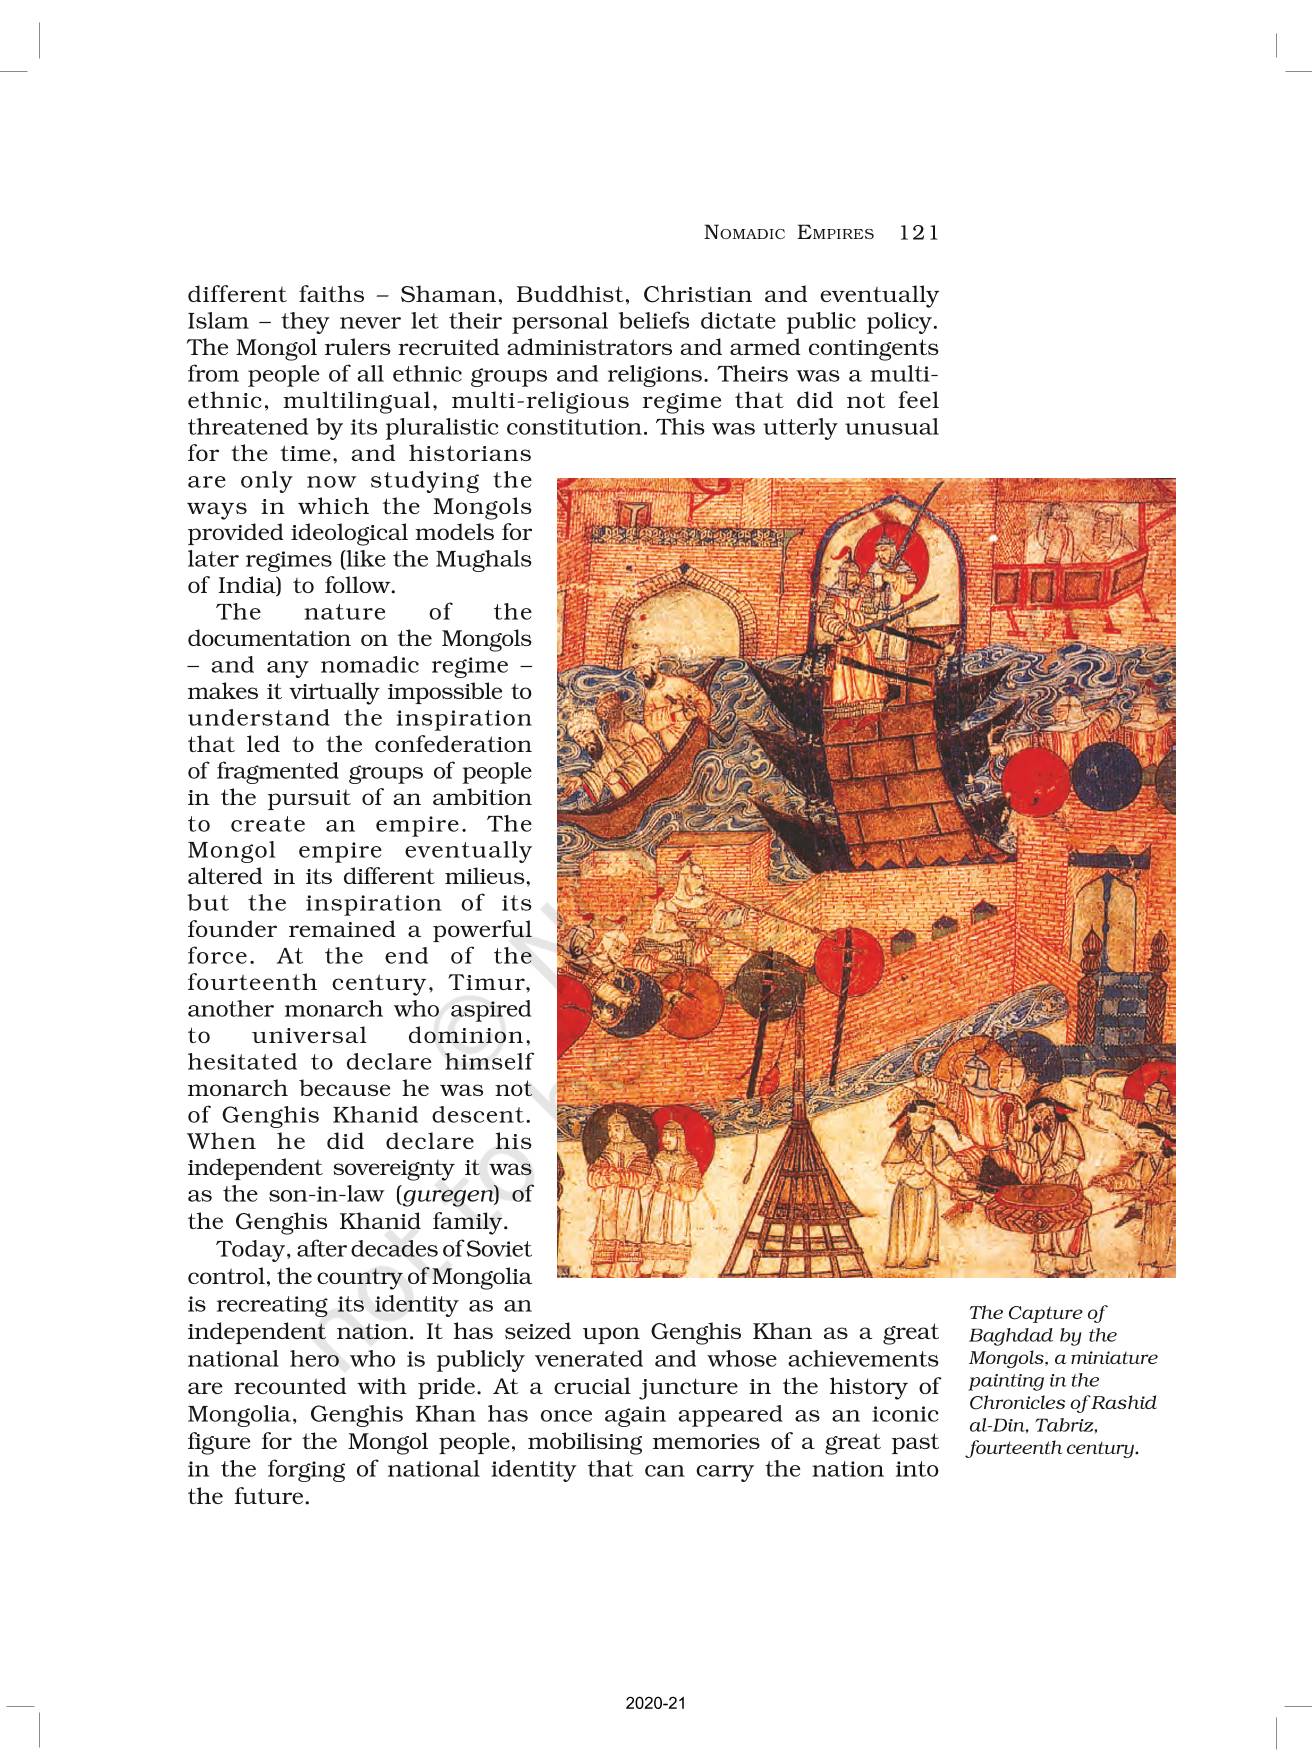 Nomadic Empires - NCERT Book of Class 11 Themes In World History